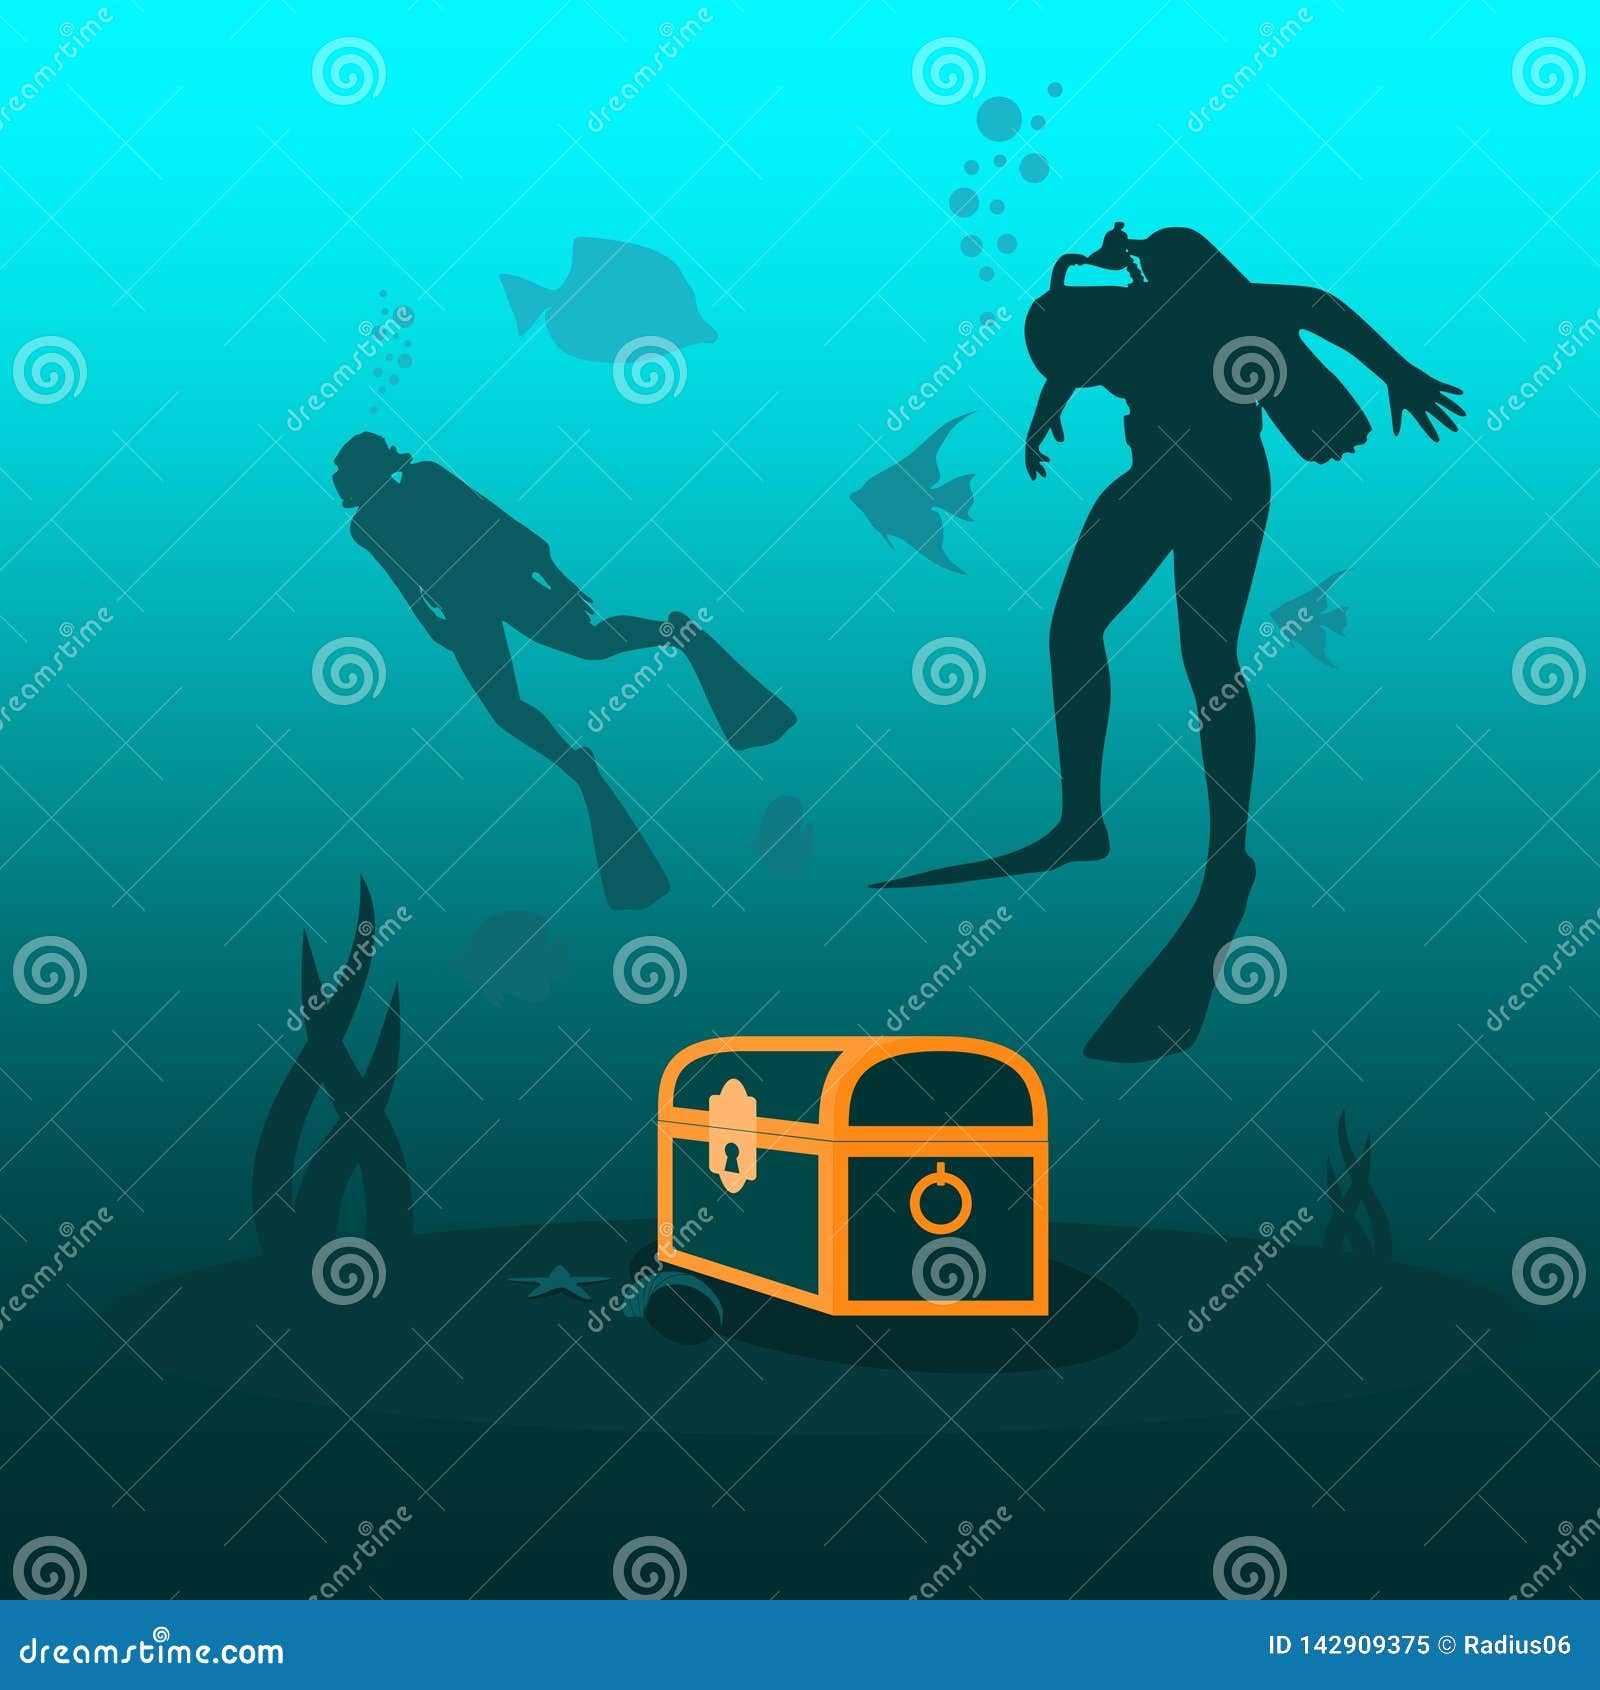 Diving Sport Concept Stock Vector Illustration Of Pirate